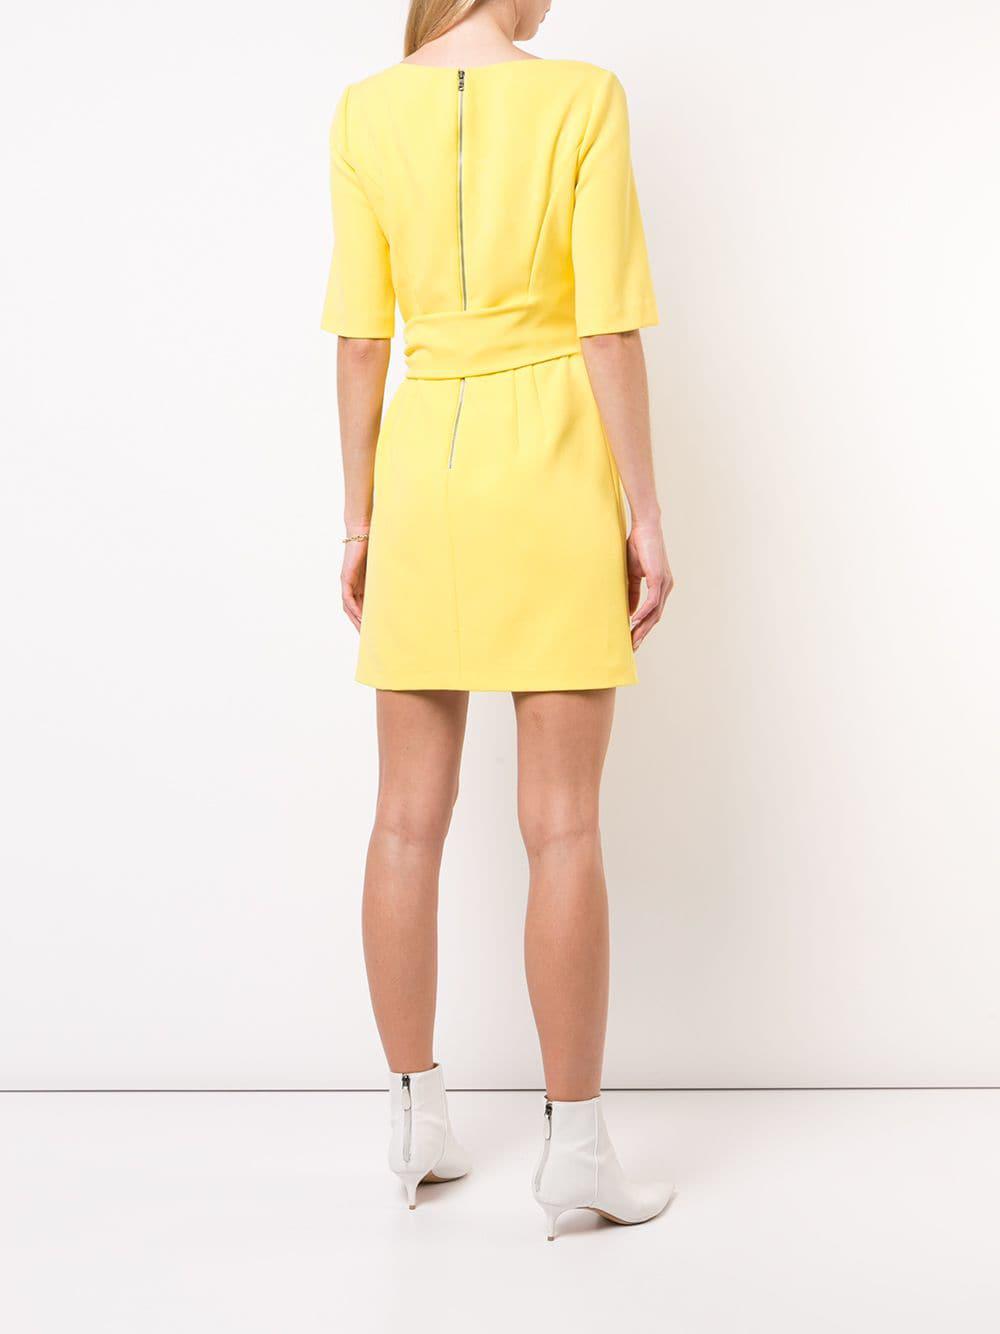 Alice + Olivia Synthetic Belted Shift Dress in Yellow - Lyst